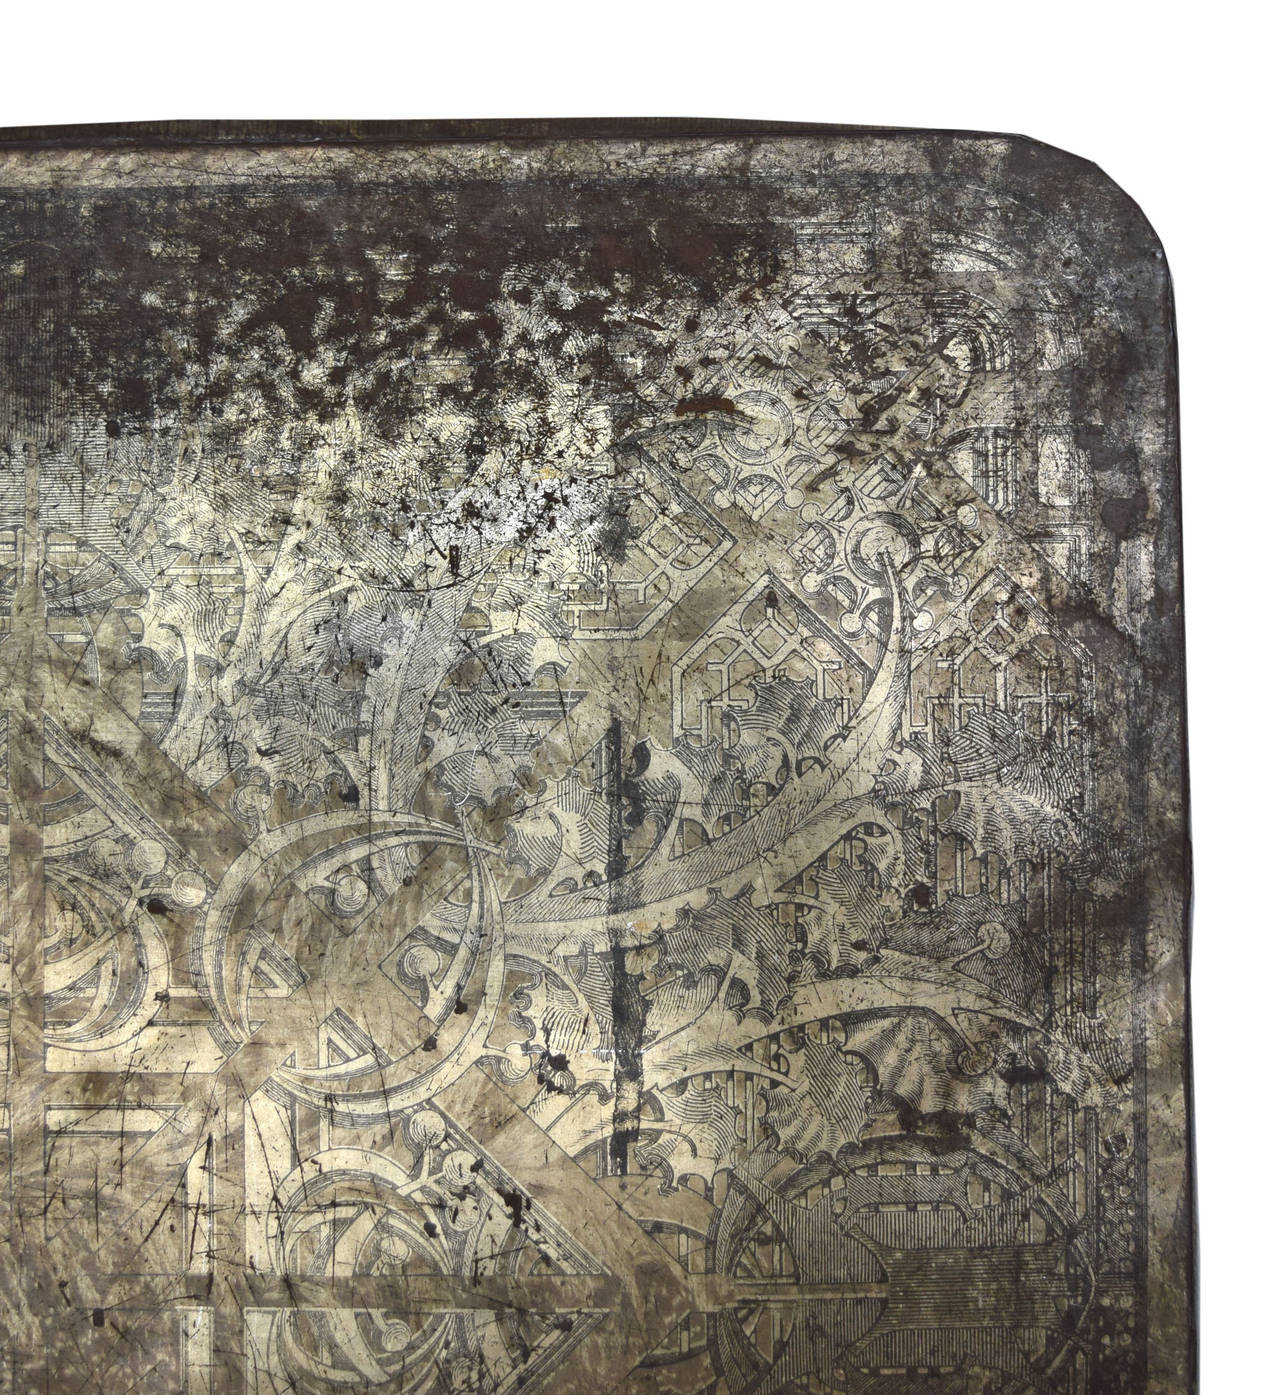 A galvanized tin stove board from circa 1920 by Louis Sullivan. These stove boards are documented as the last commissioned work of Sullivan before his death in 1924. Used to prevent house fires by protecting the floor from falling embers, these